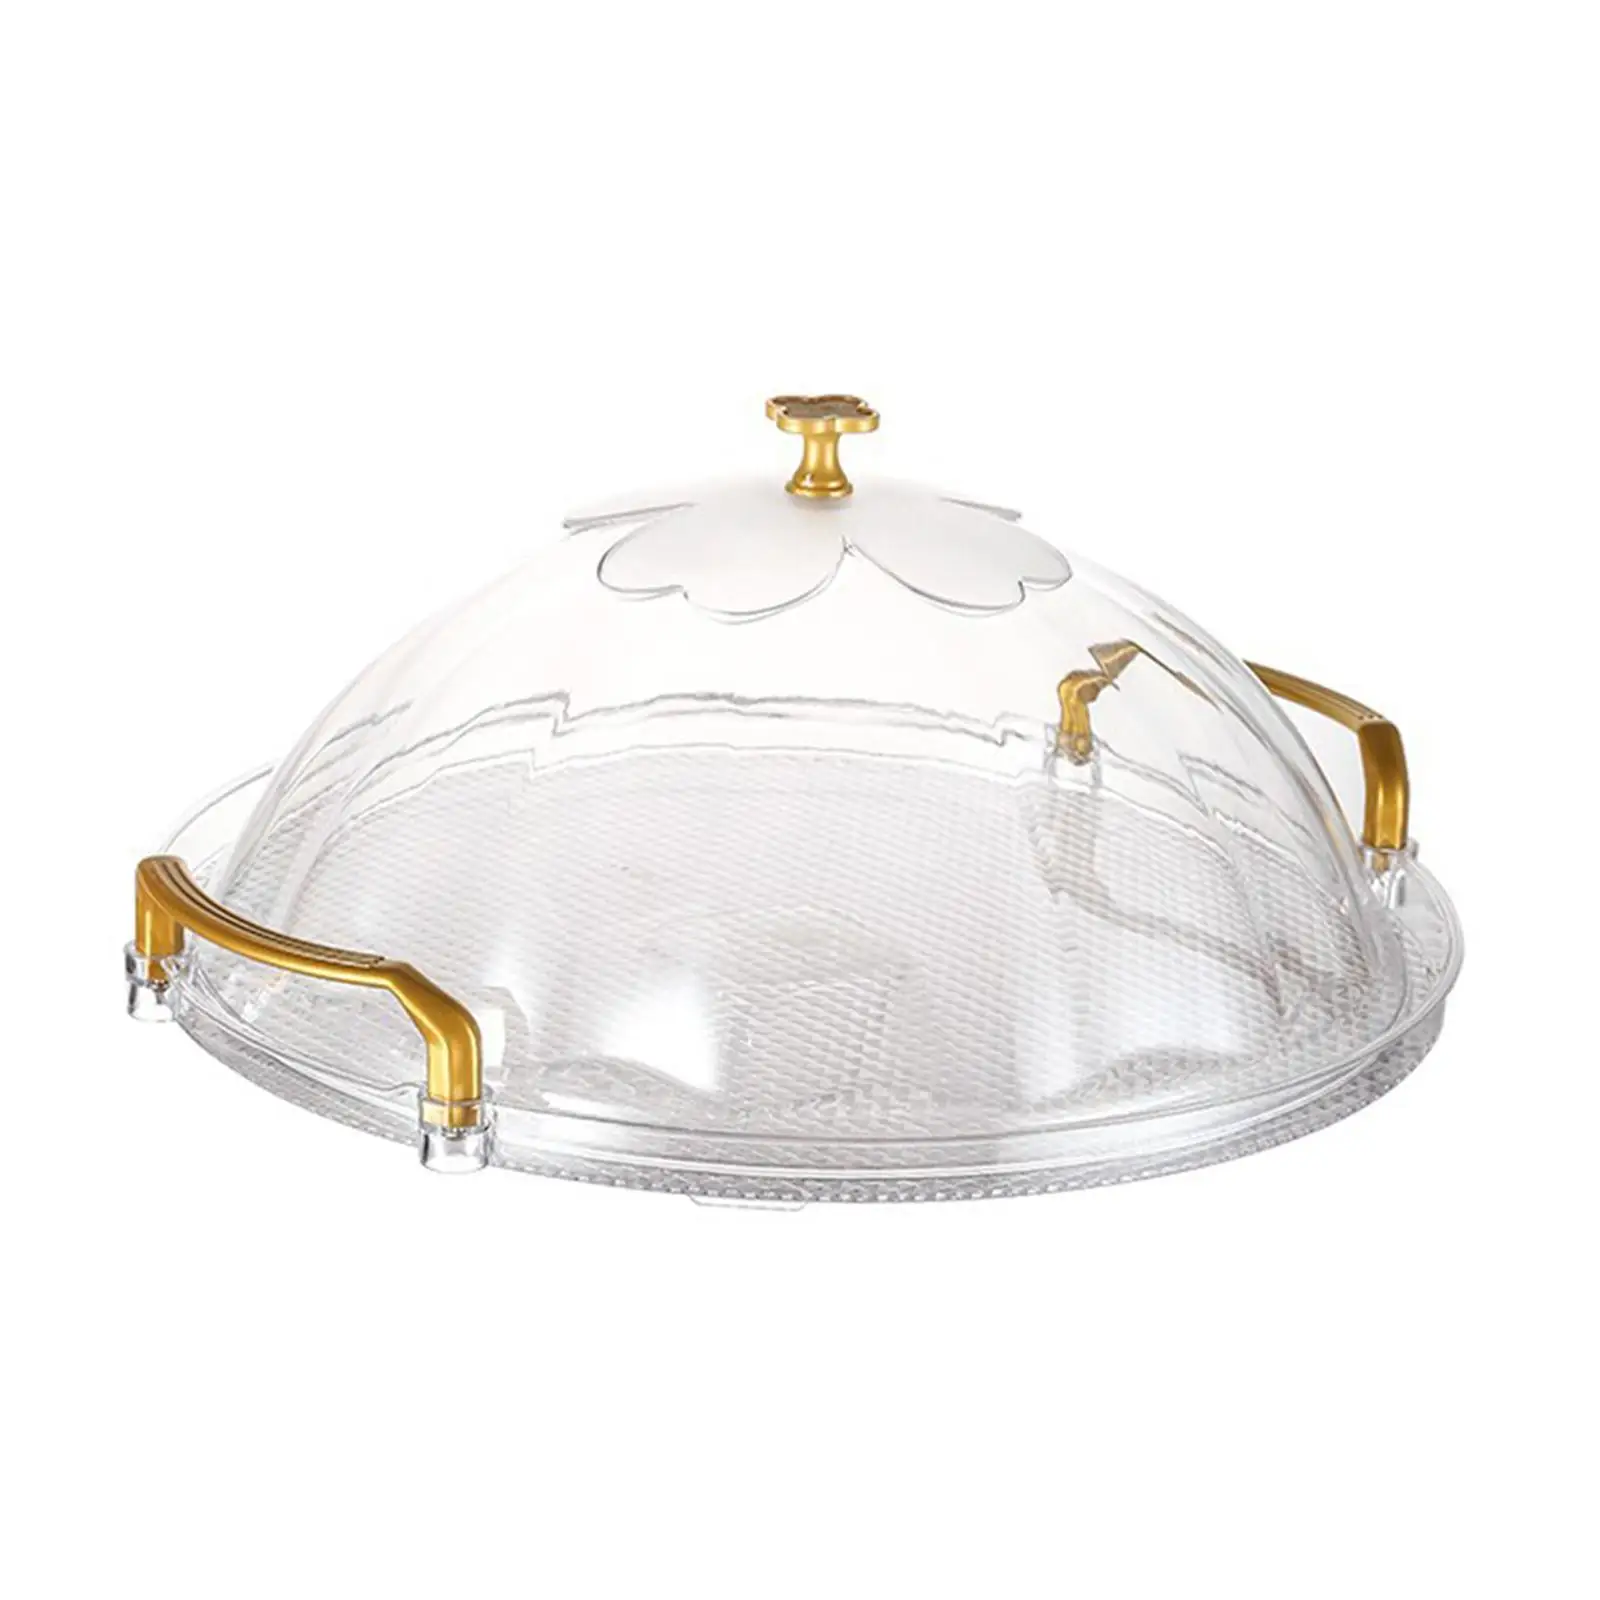 Cake Plate with Dome Serving Tray with Handle for Breakfast Tea Party